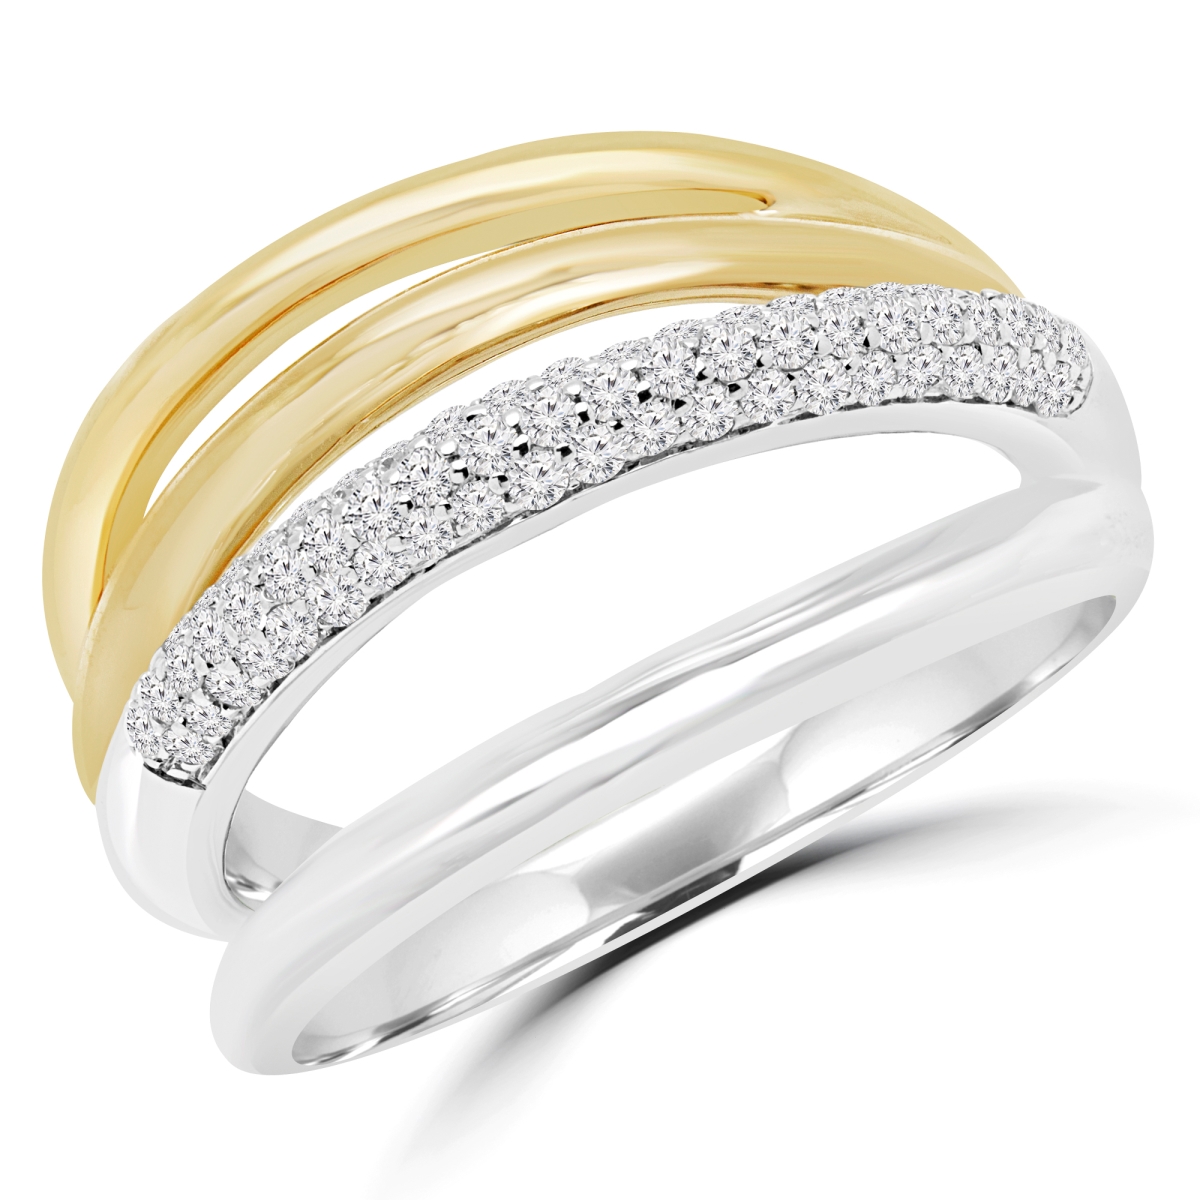 Picture of Majesty Diamonds MDR170050-5.5 0.37 CTW Round Diamond Cocktail Semi-Eternity Ring in 14K Two-Tone Gold - 5.5